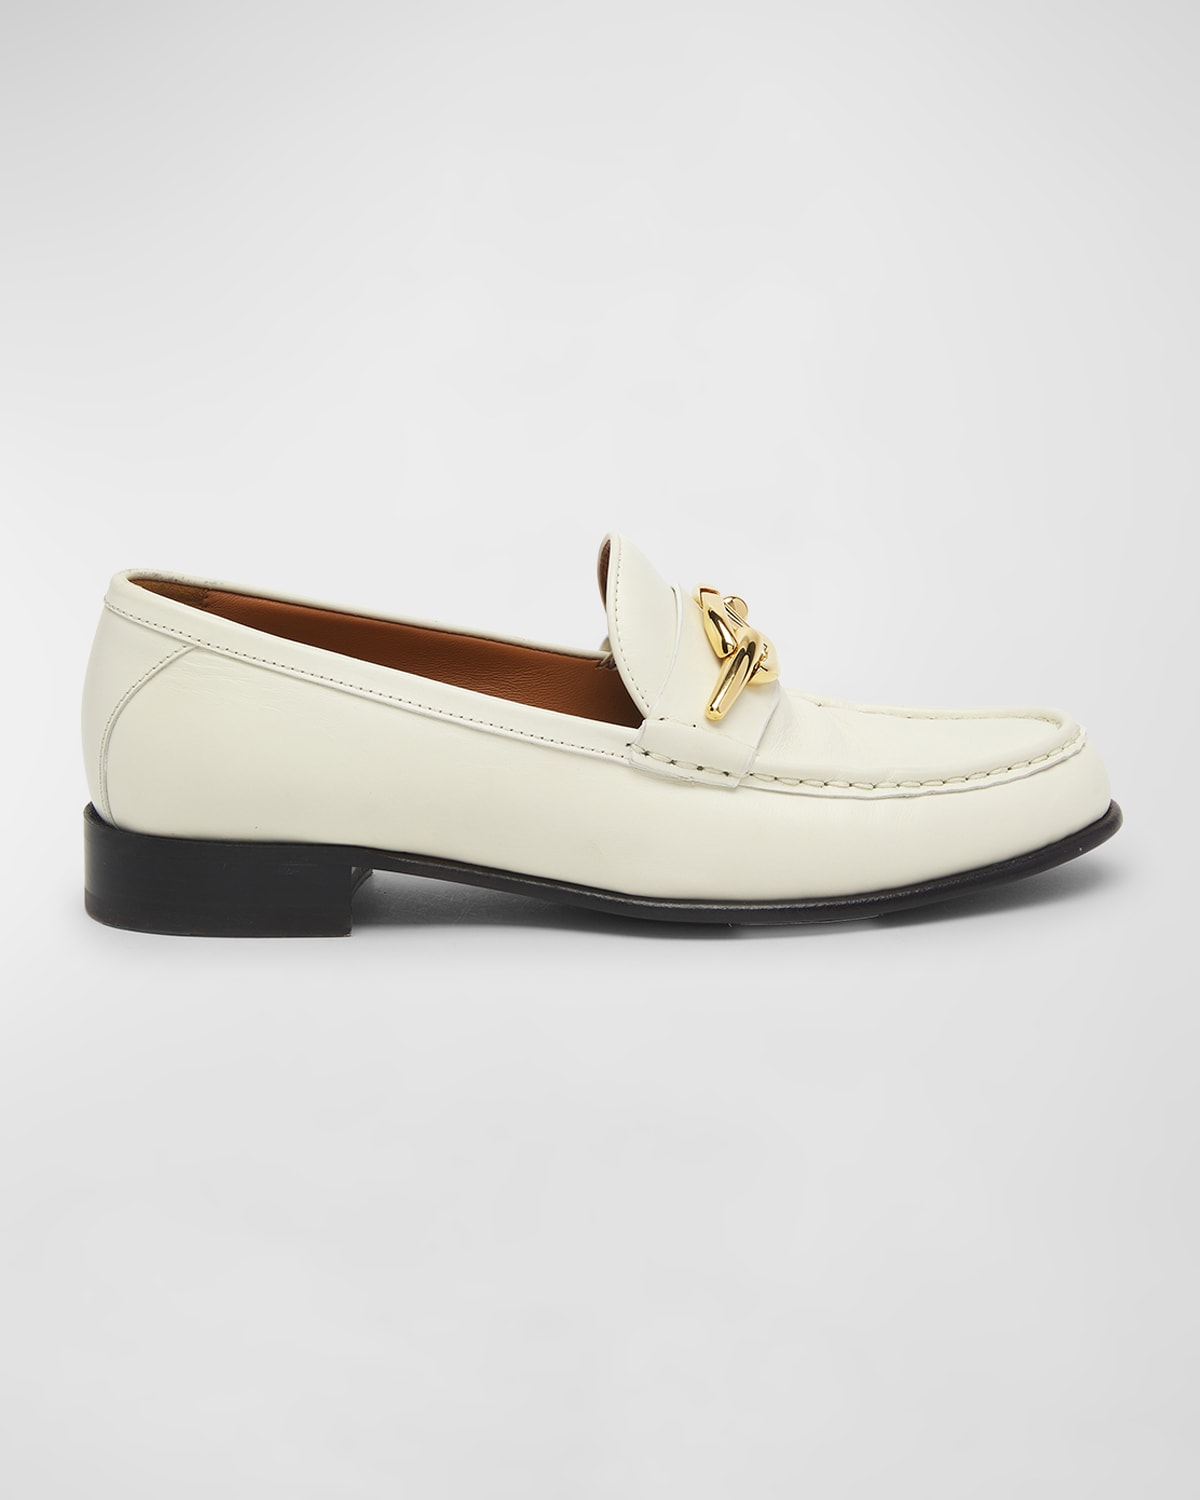 Gate VLogo Leather Loafers